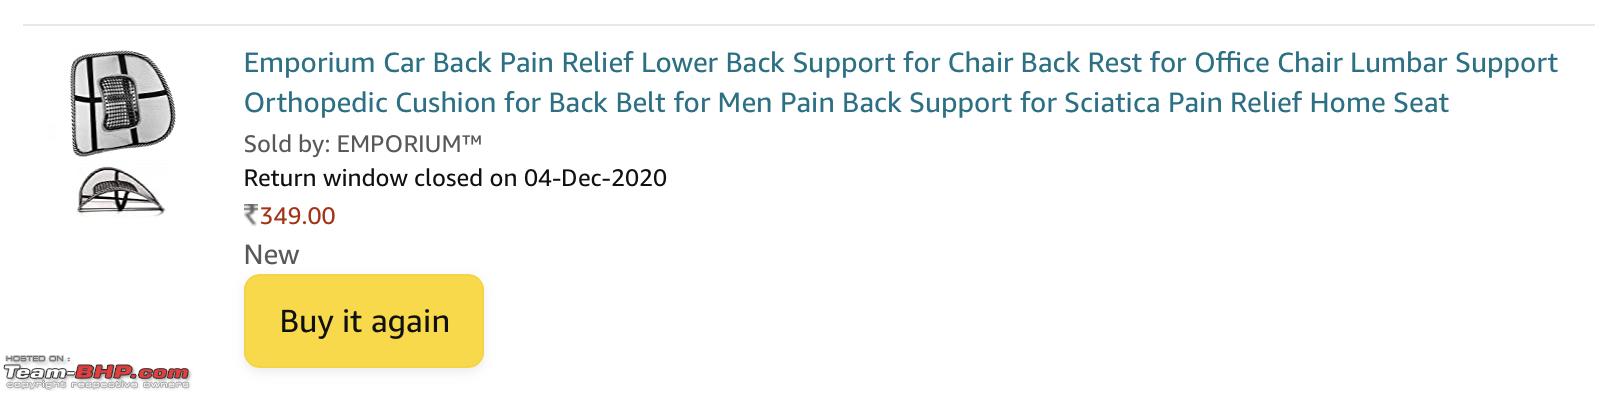 Emporium Car Back Pain Relief Lower Back Support for Chair Back Rest for  Office Chair Lumbar Support Orthopedic Cushion for Back Belt for Men Pain  Back Support for Sciatica Pain Relief Home